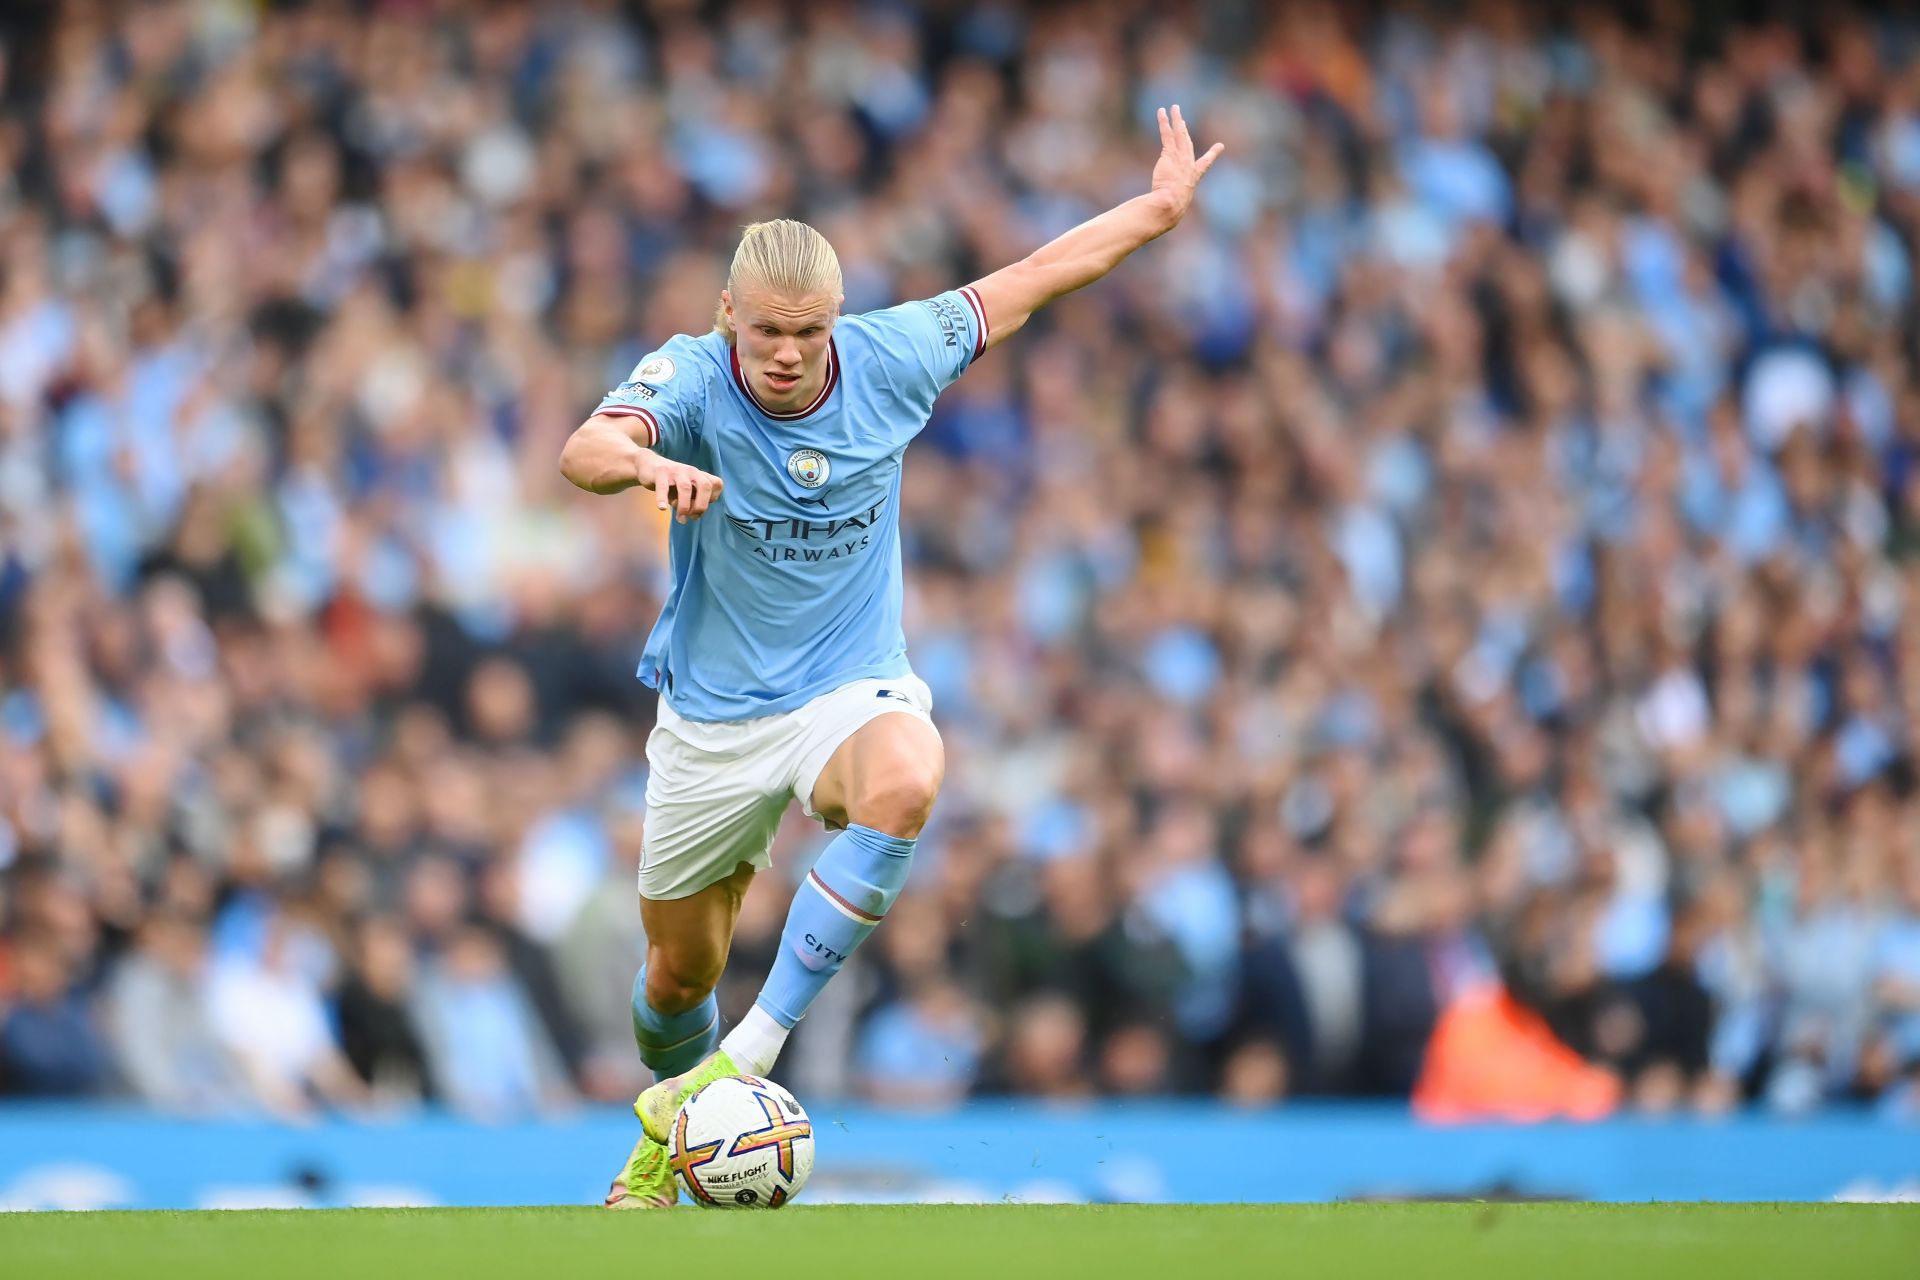 The Norwegian was simply unstoppable for Manchester City yesterday.